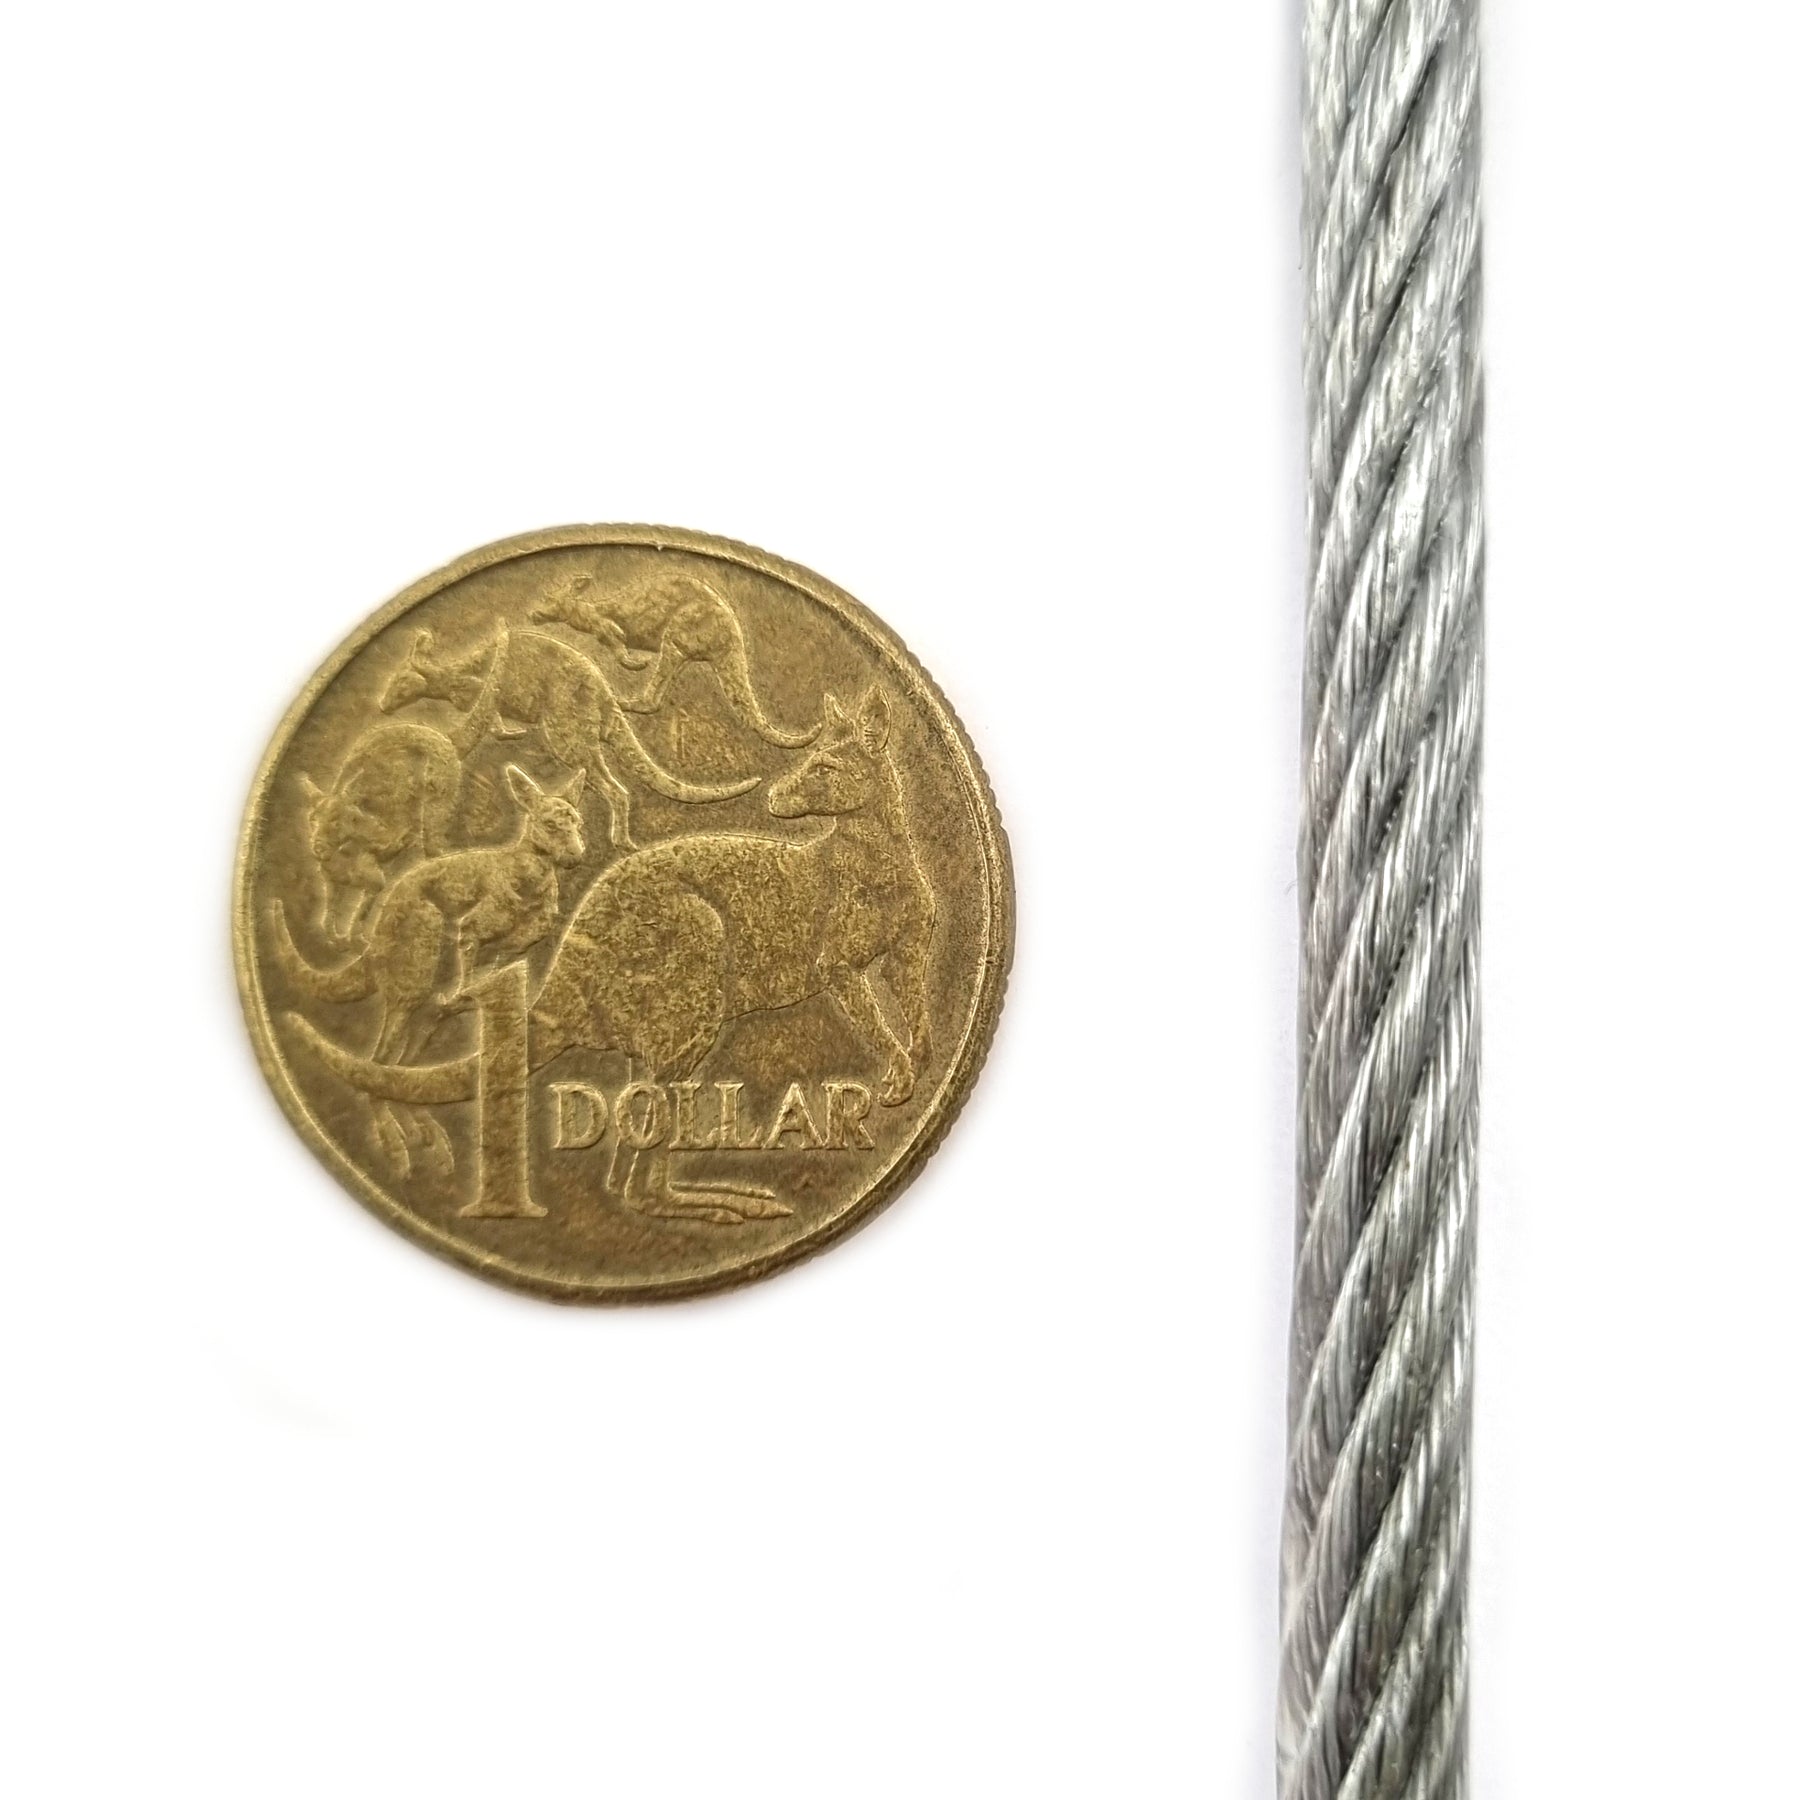 4mm PVC coated galvanised wire rope (wire cord / wire cable). Shop online chain.com.au. Australia wide shipping.